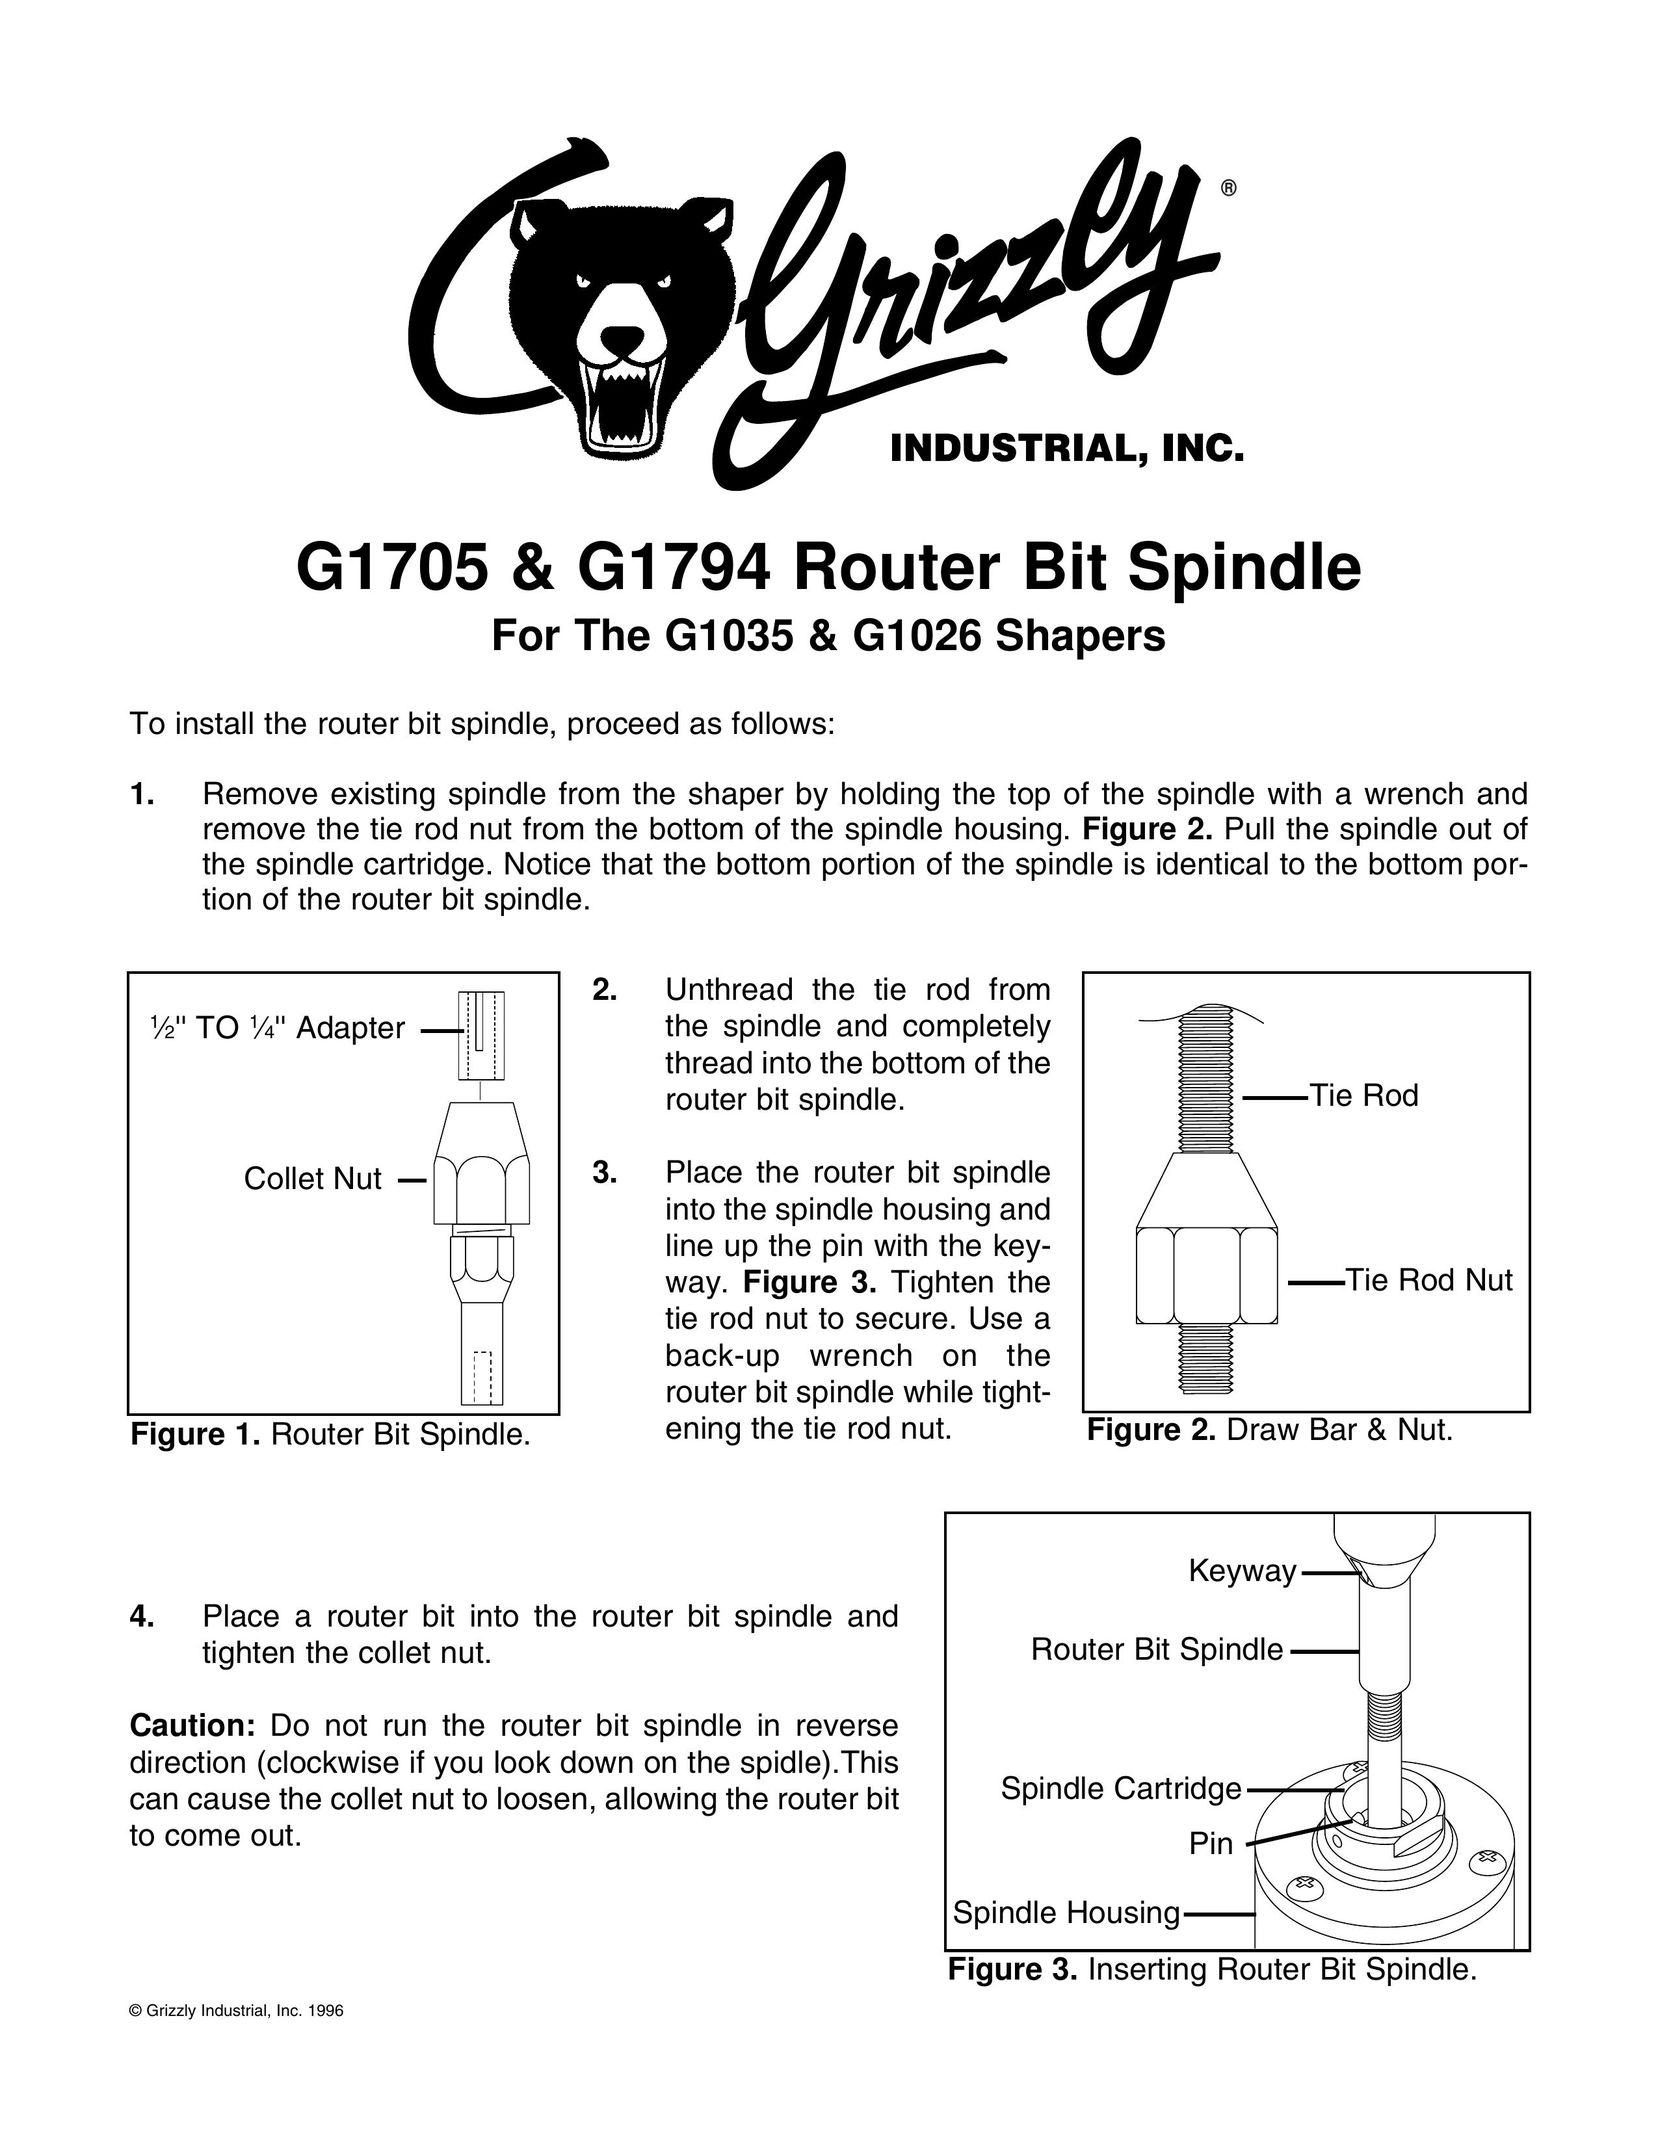 Grizzly G1705 Network Router User Manual